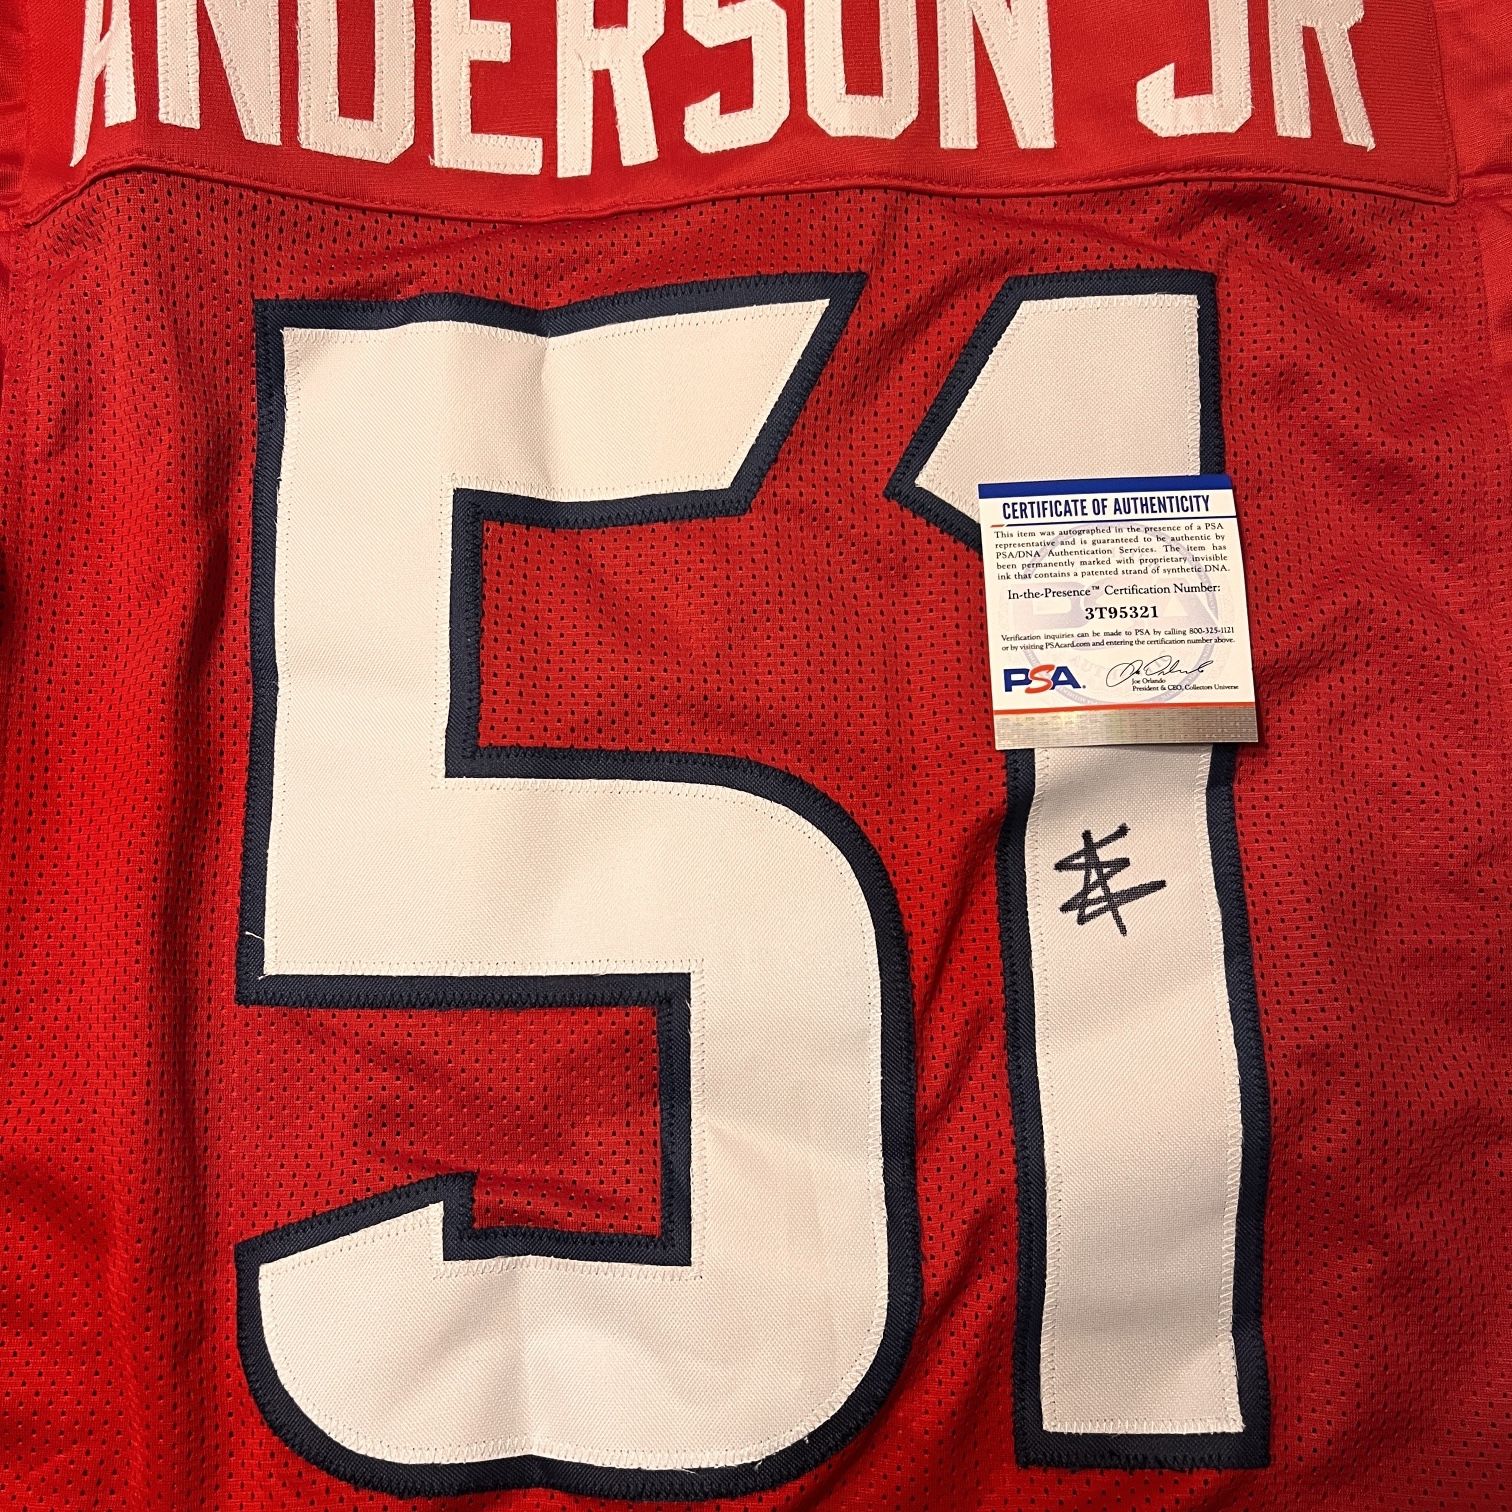 Will Anderson Jr Autographed Jersey